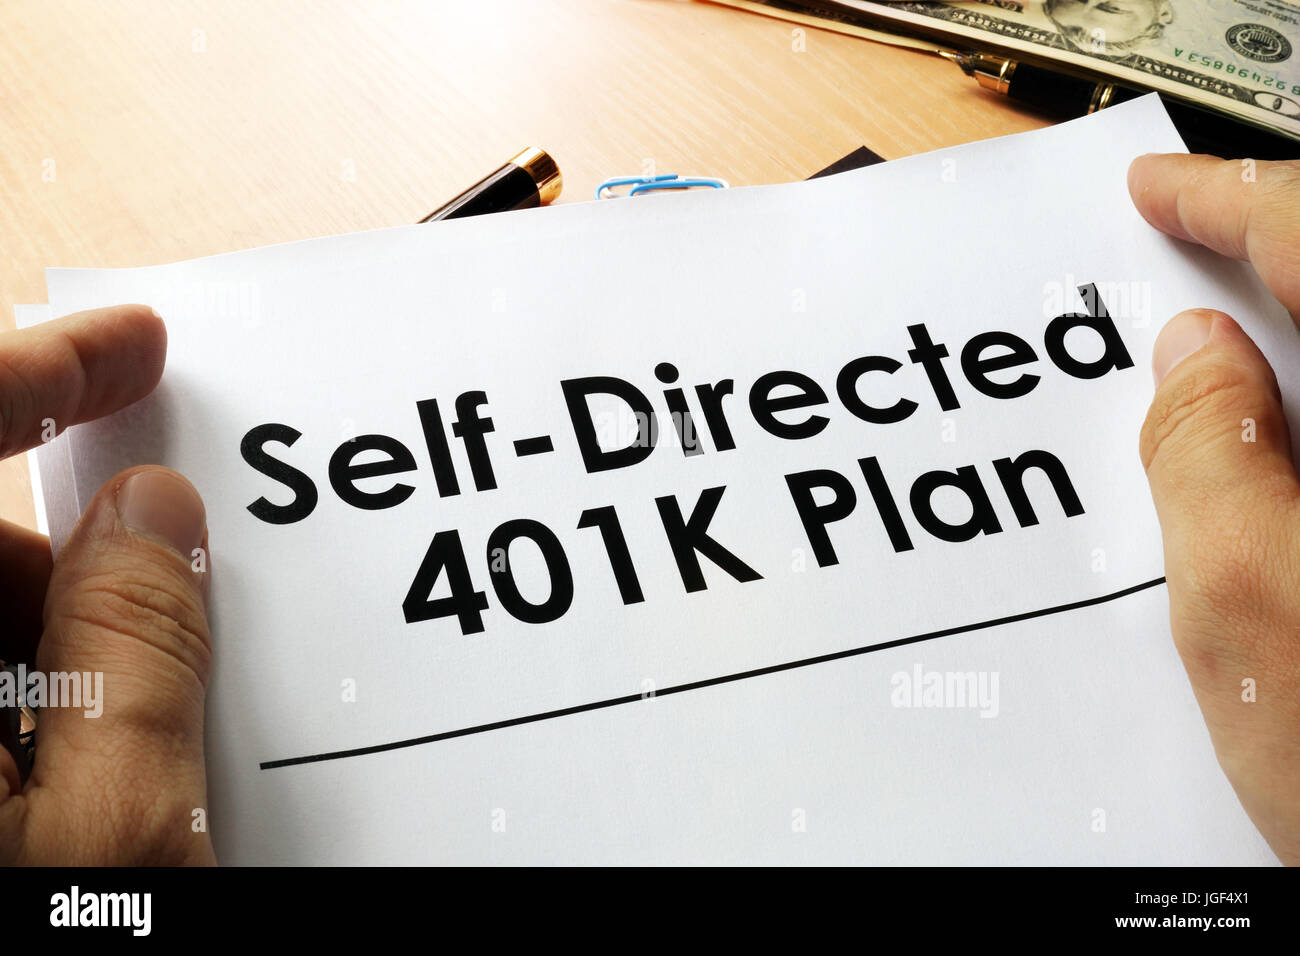 Self directed 401k plan written on a paper. Stock Photo